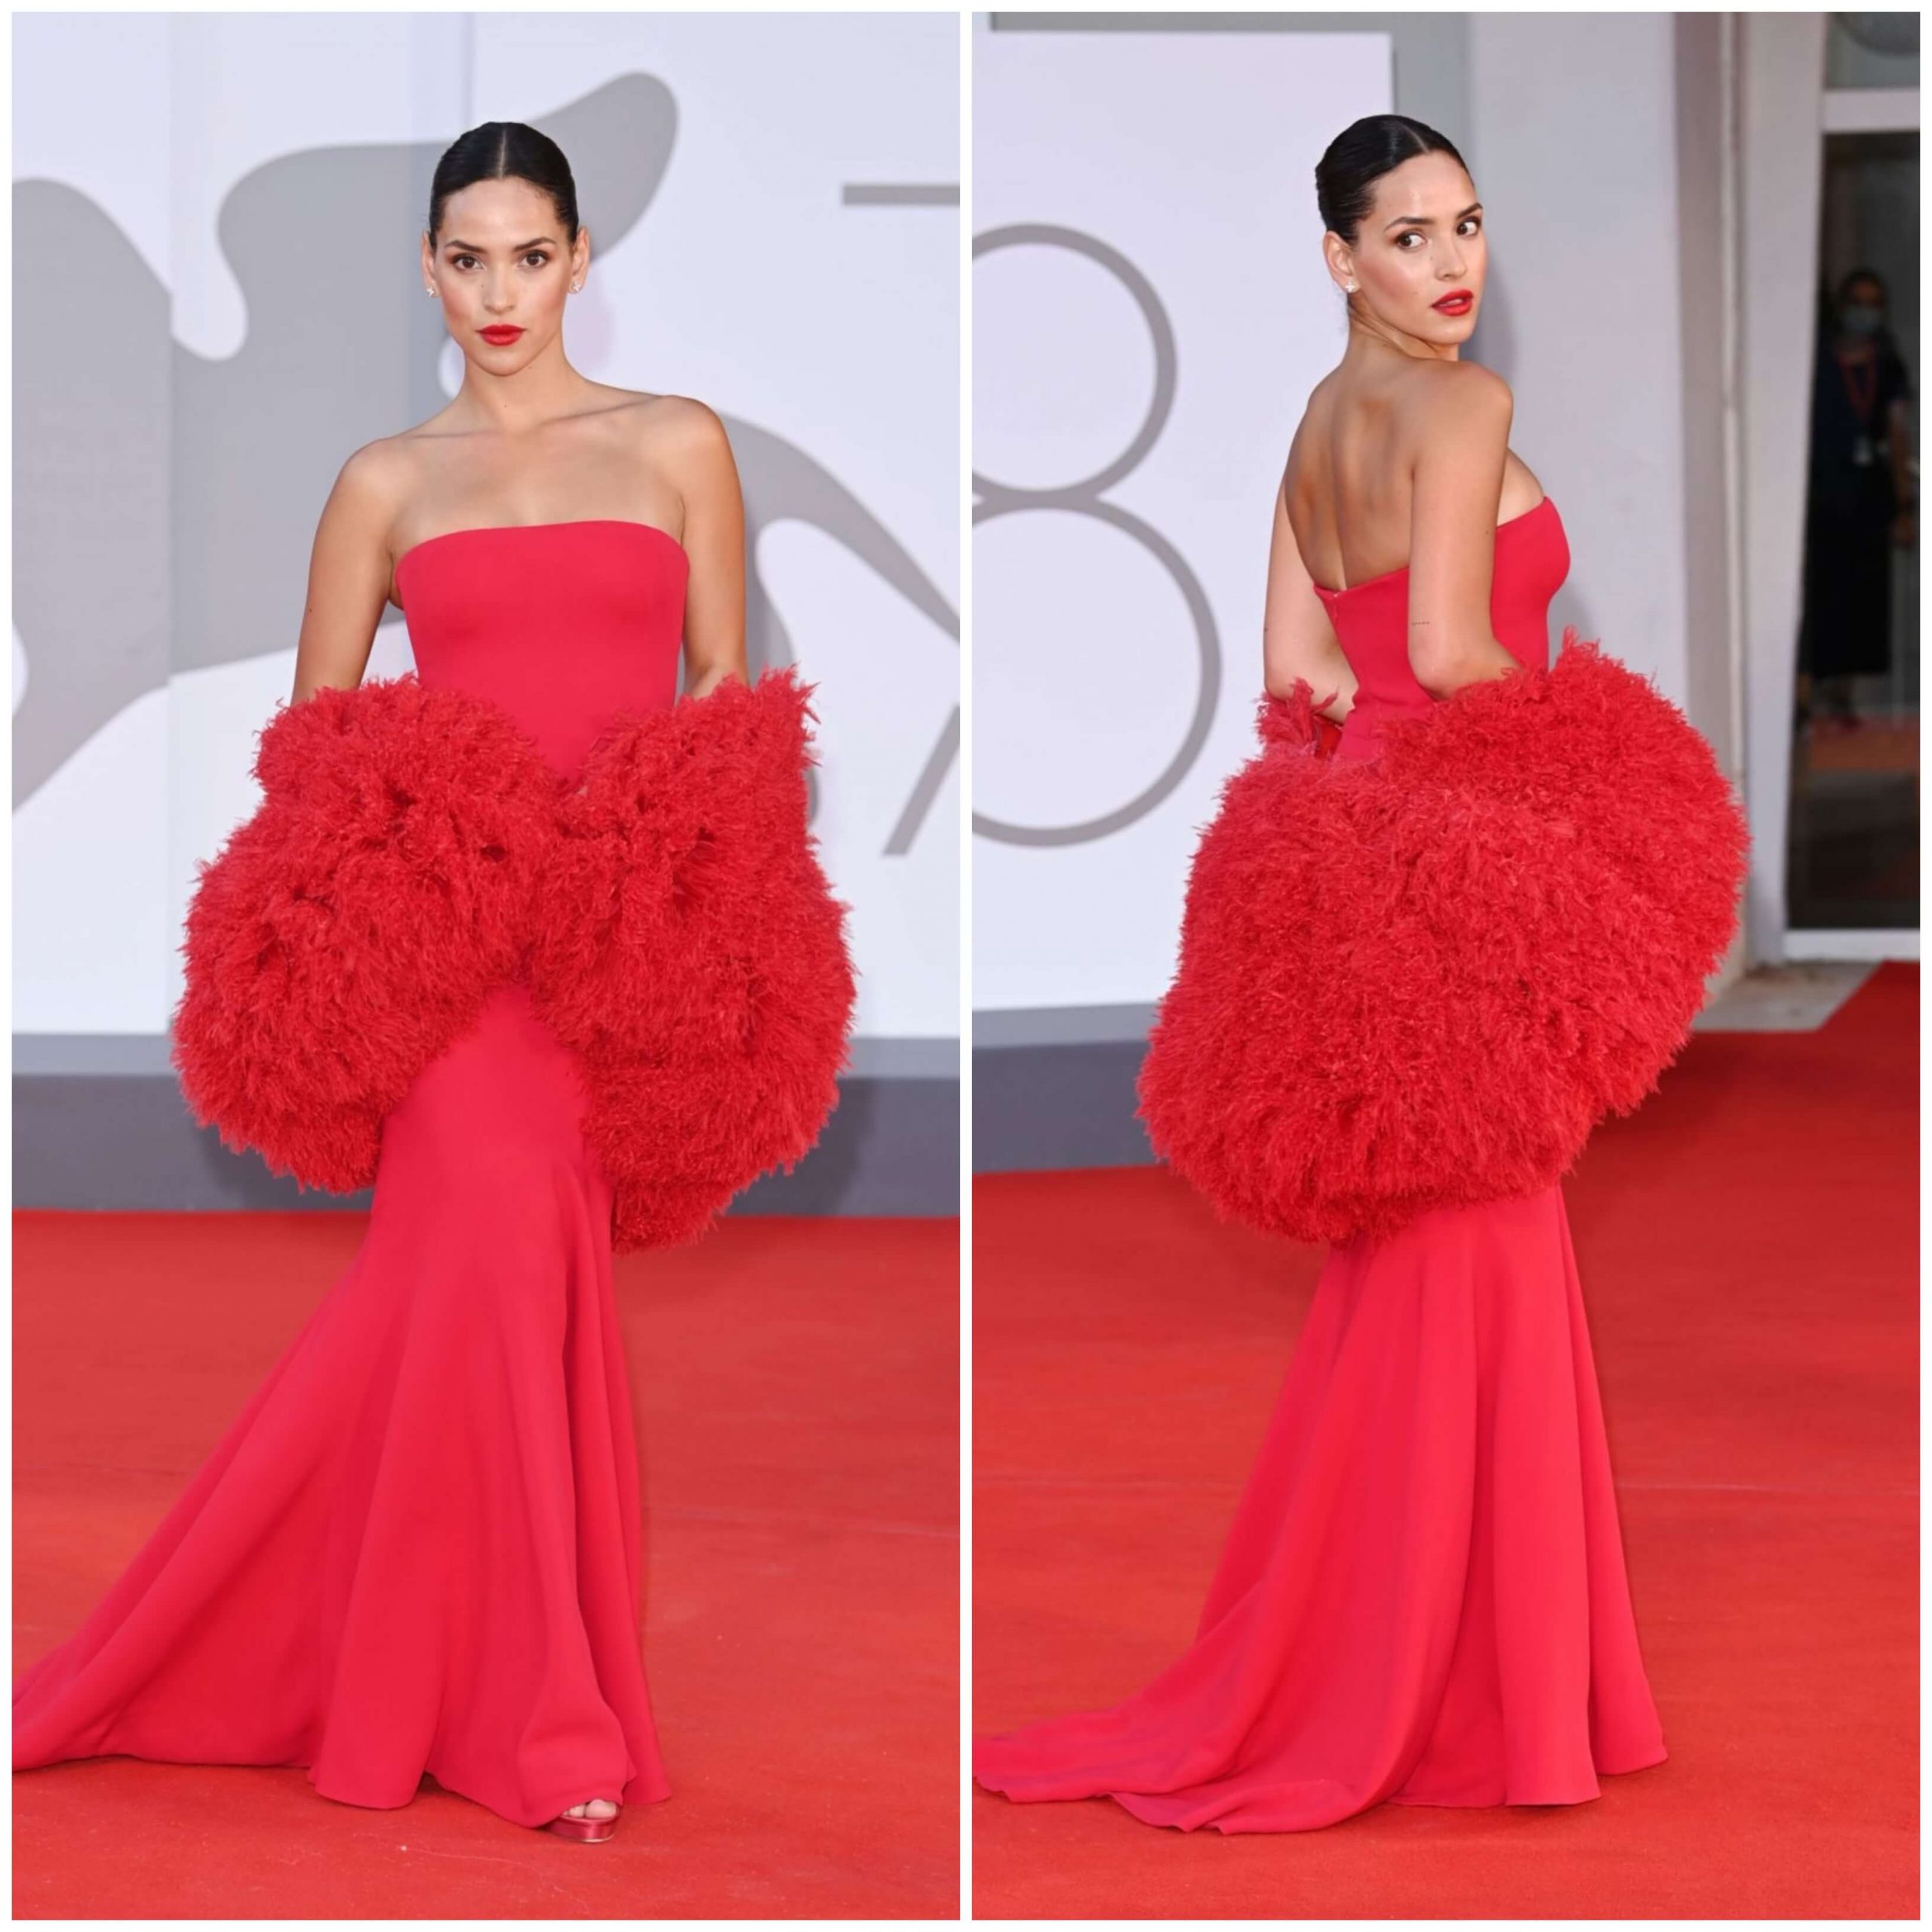 Adria Arjona Sexy Killer Look In Strapless Red Gown With a Matching Fuzzy Bolero at the 78th Venice International Film Festival